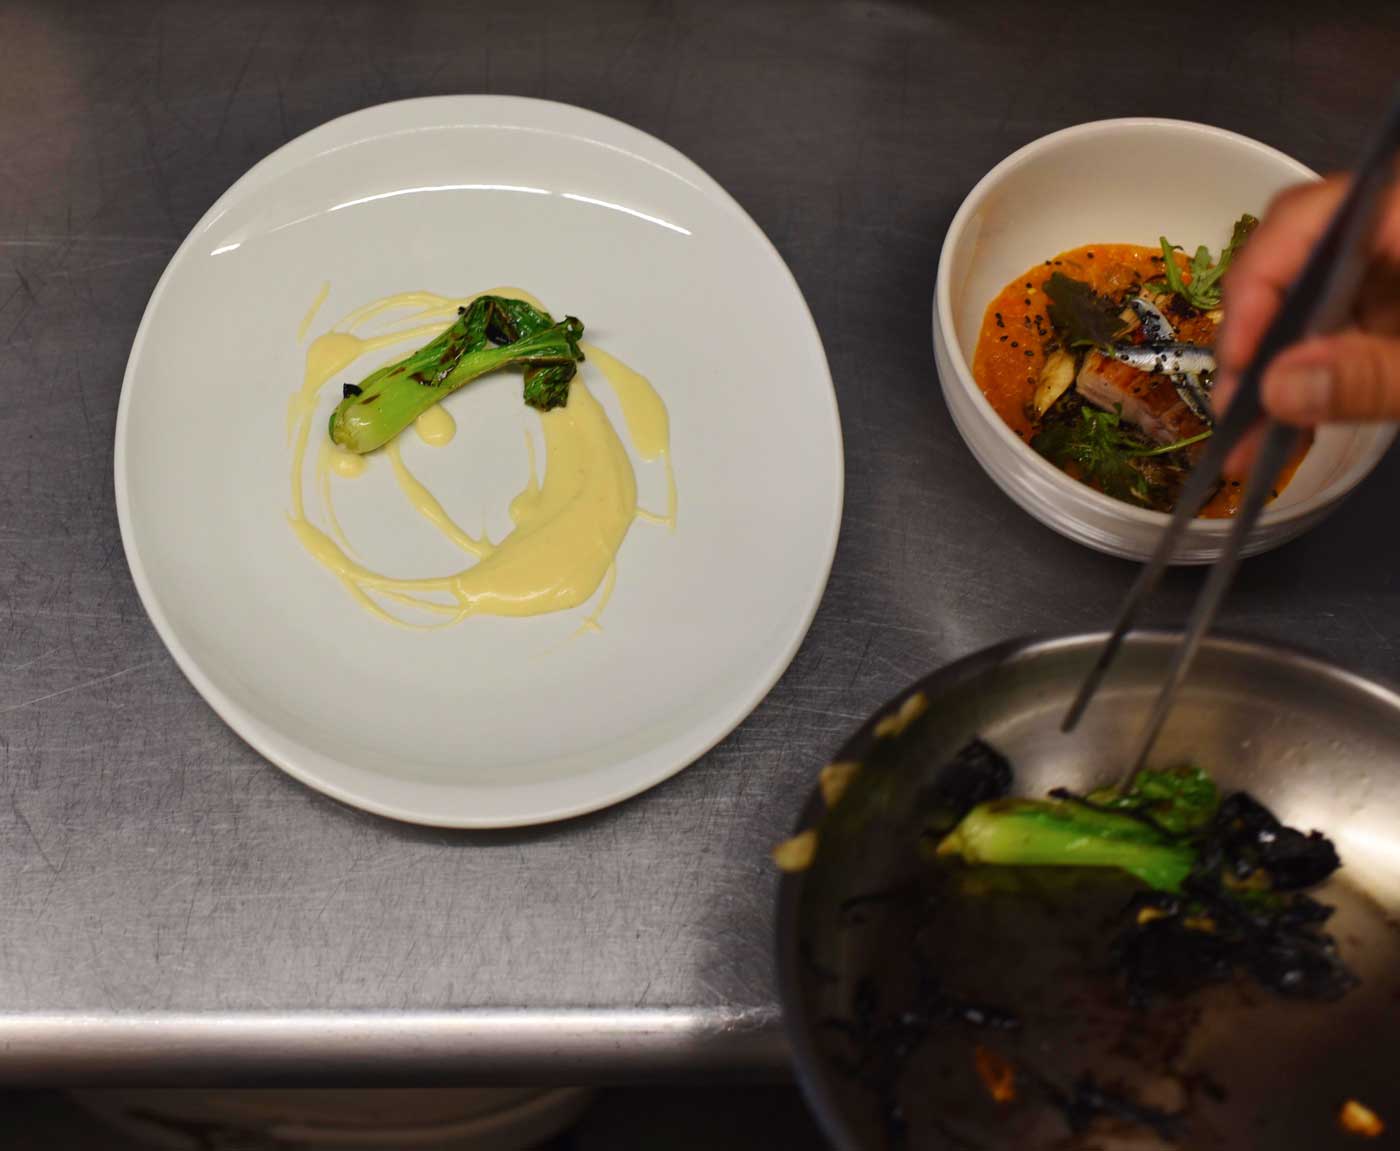 Prepping the plate with fresh California inspired ingredients.